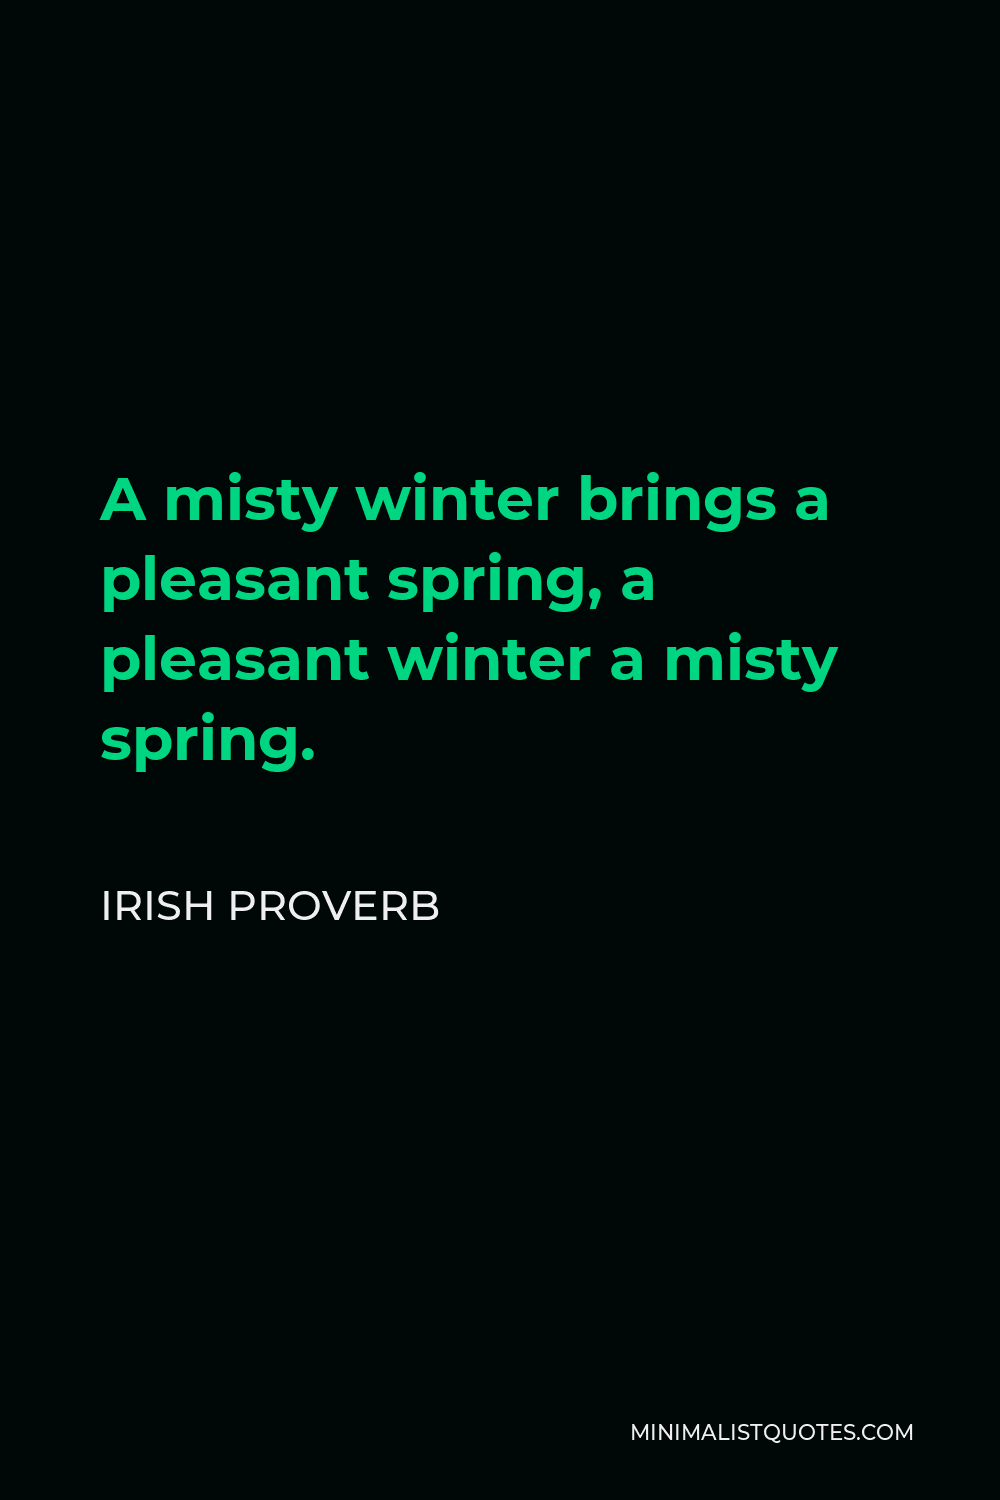 Irish Proverb Quote - A misty winter brings a pleasant spring, a pleasant winter a misty spring.